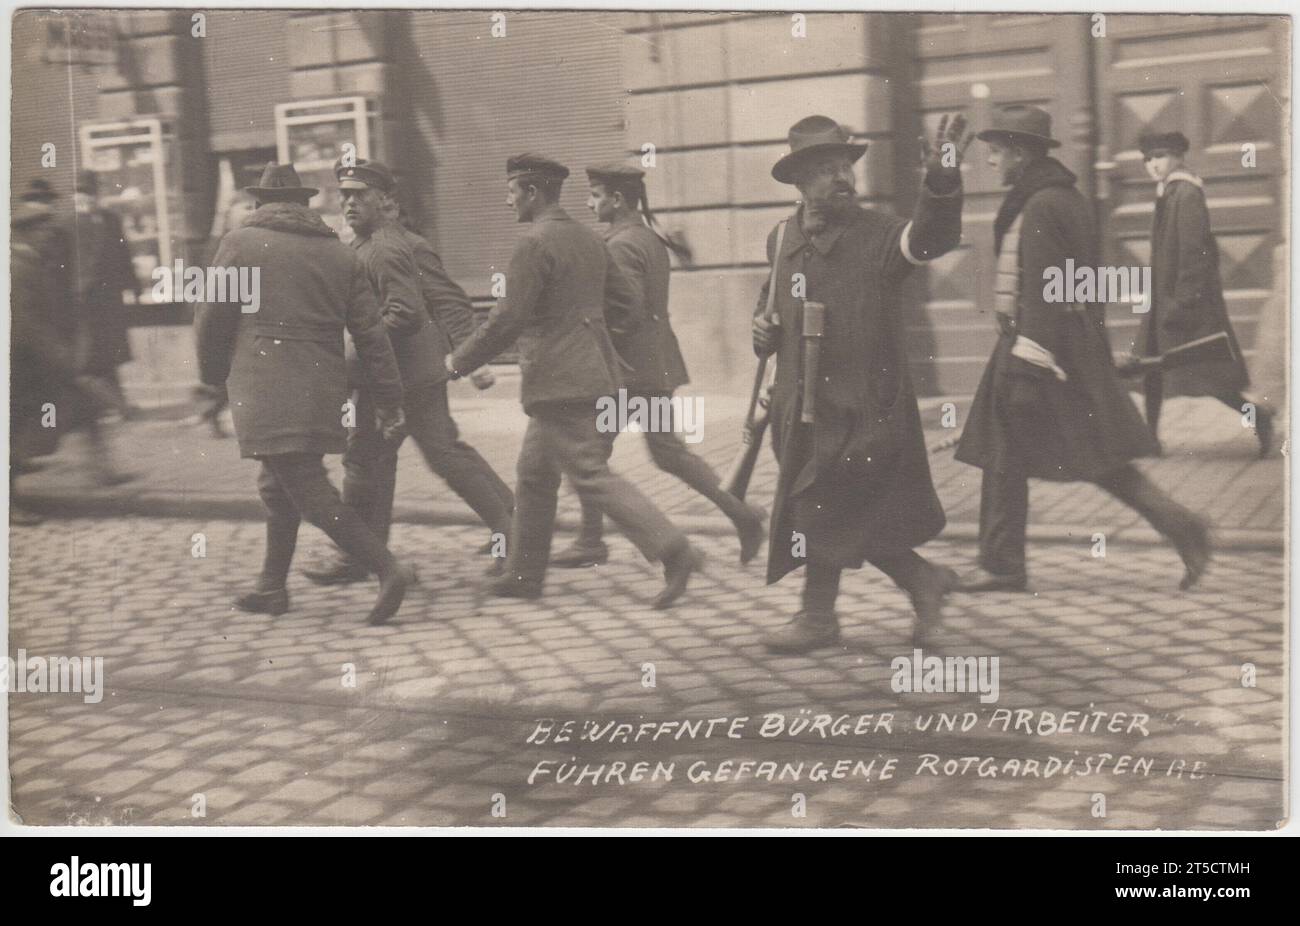 'Armed citizens and workers drove away captured Red Guards' / 'Bewaffnete bürger und arbeiter fuhren gefangene rotgardisten': aftermath of street fighting during the German revolution, 1918-1919, after the First World War. The location of the photograph is unidentified but it may show Munich during the overthrow of the Bavarian Soviet Republic. Communist Red Guards being led away by armed men in civilian clothes. One armed man is gesturing to someone out of camera shot. Stock Photo